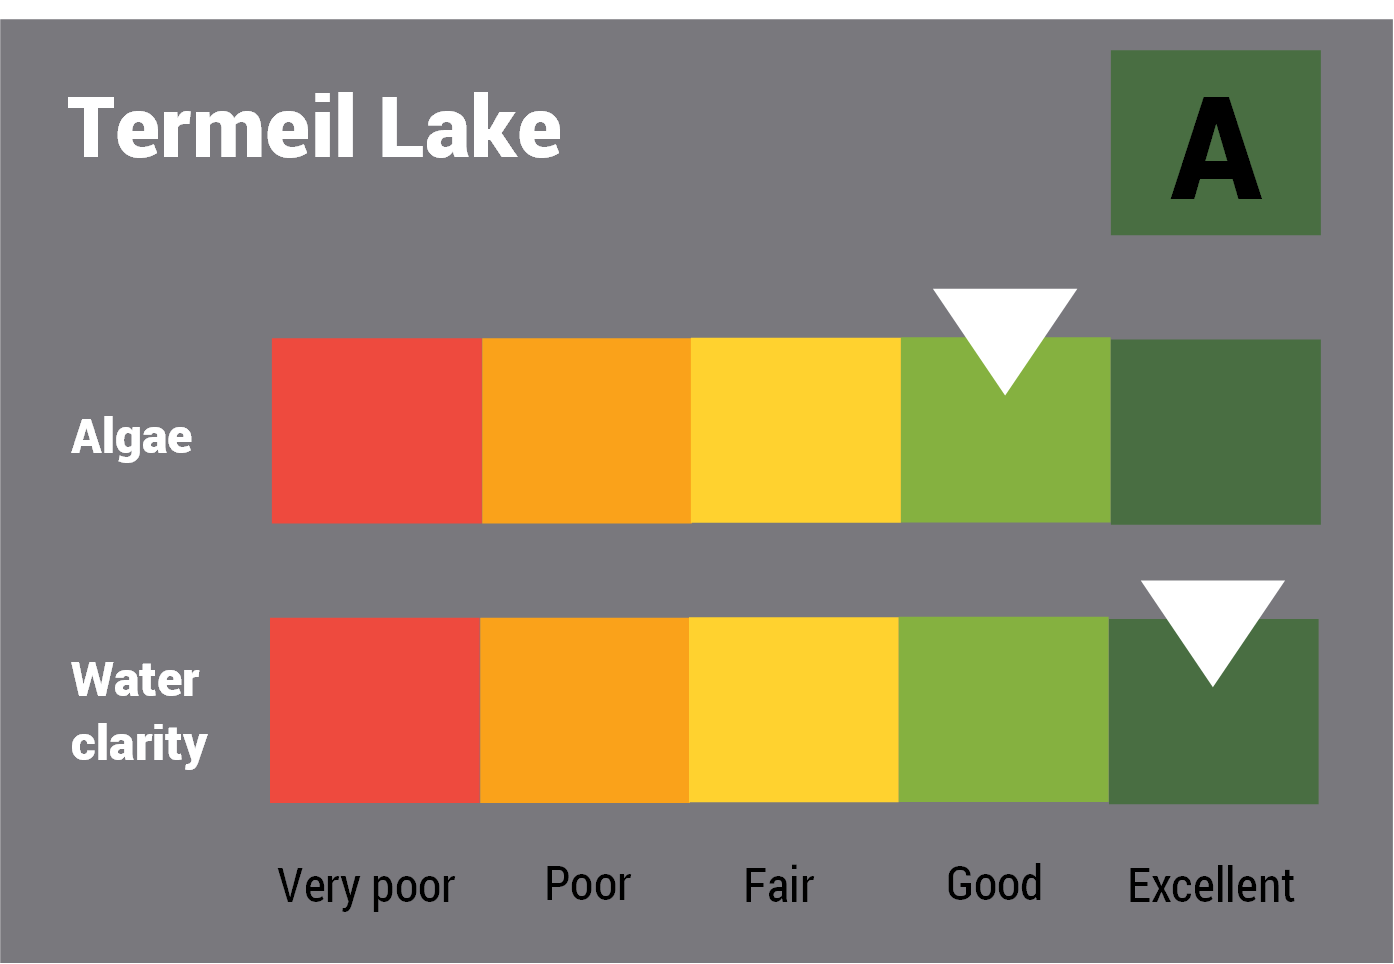 Termeil Lake water quality report card for algae and water clarity showing colour-coded ratings (red, orange, yellow, light green and dark green, which represent very poor, poor, fair, good and excellent, respectively). Algae is rated 'poor' and water clarity is rated 'excellent' giving an overall rating of 'fair' or 'C'.